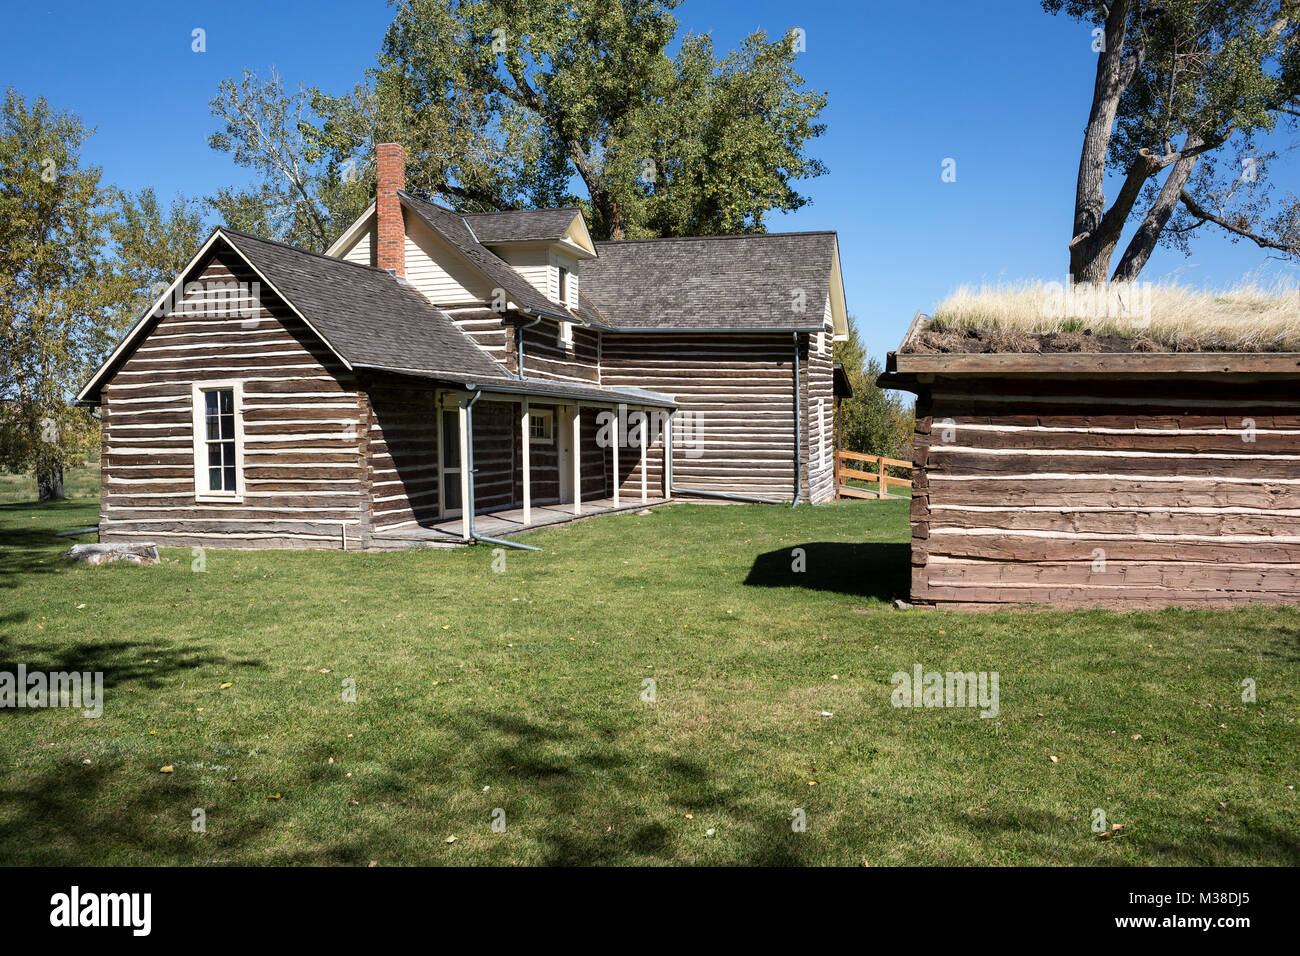 MT00101-00...MONTANA - House at Chief Plenty Coups State Park on yjr Crow Indian Reservation. Stock Photo